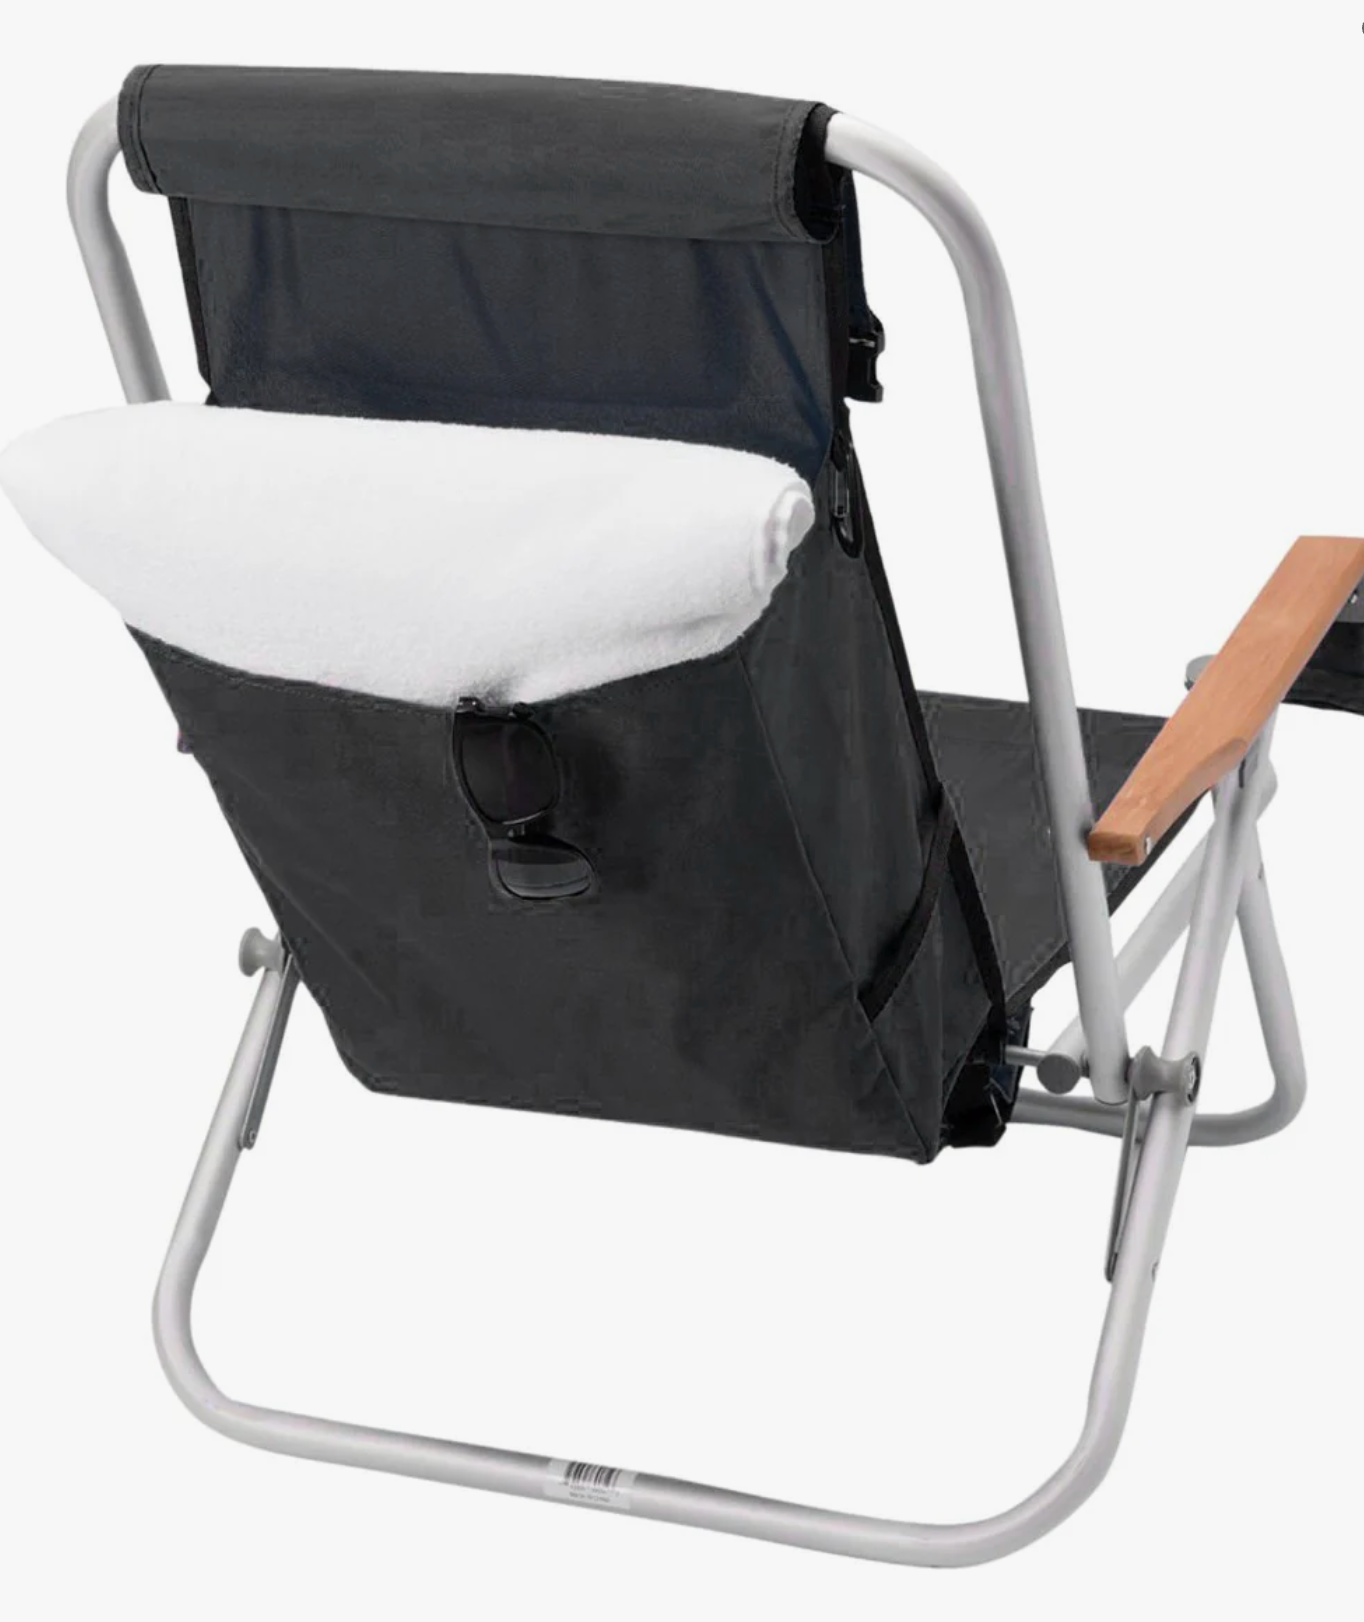 Lazy Lounger Backpack Beach Chair